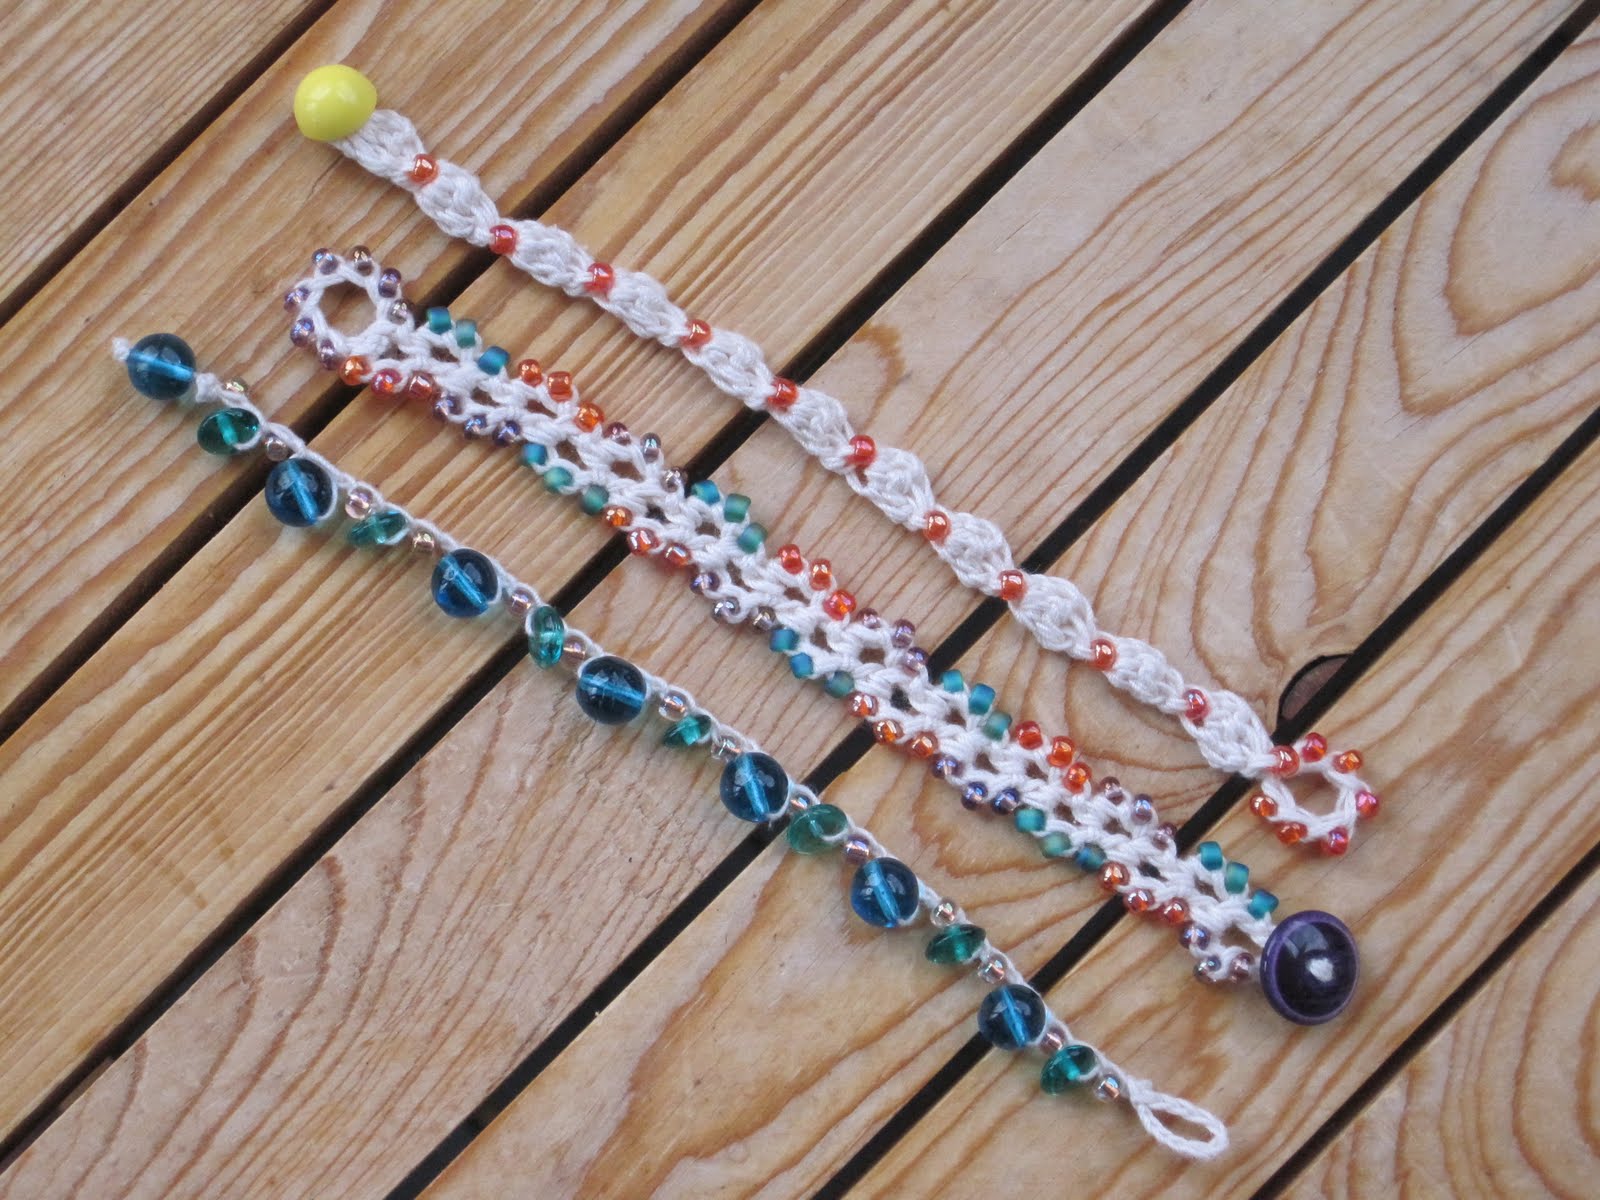 Mr. Micawber's Recipe For Happiness: Bead Crochet 101: Beachy Little